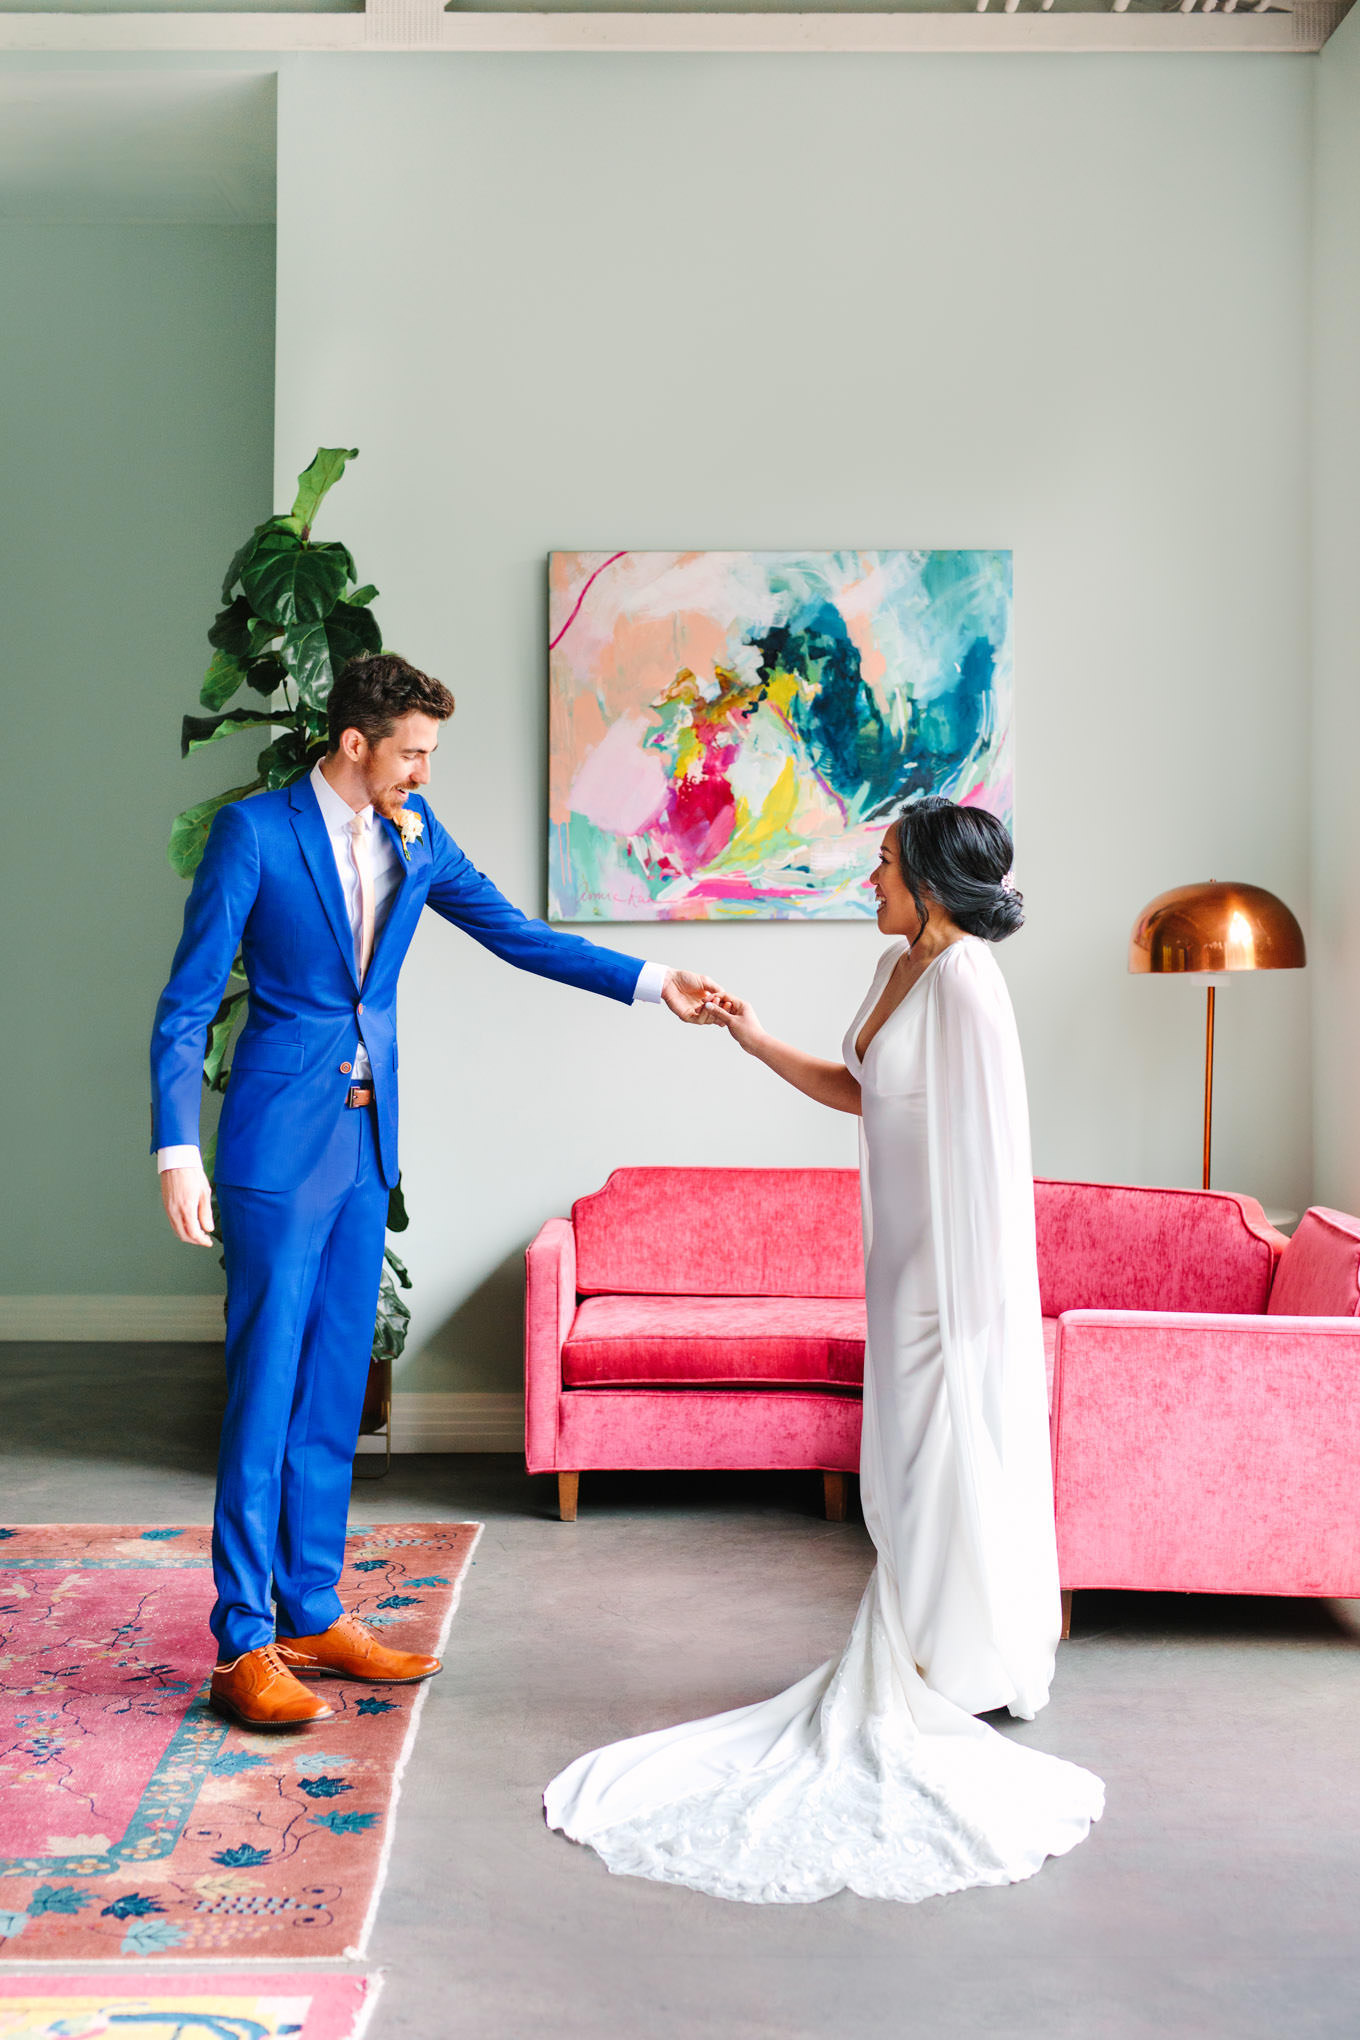 Bride and groom first look | TV inspired wedding at The Fig House Los Angeles | Published on The Knot | Fresh and colorful photography for fun-loving couples in Southern California | #losangeleswedding #TVwedding #colorfulwedding #theknot   Source: Mary Costa Photography | Los Angeles wedding photographer